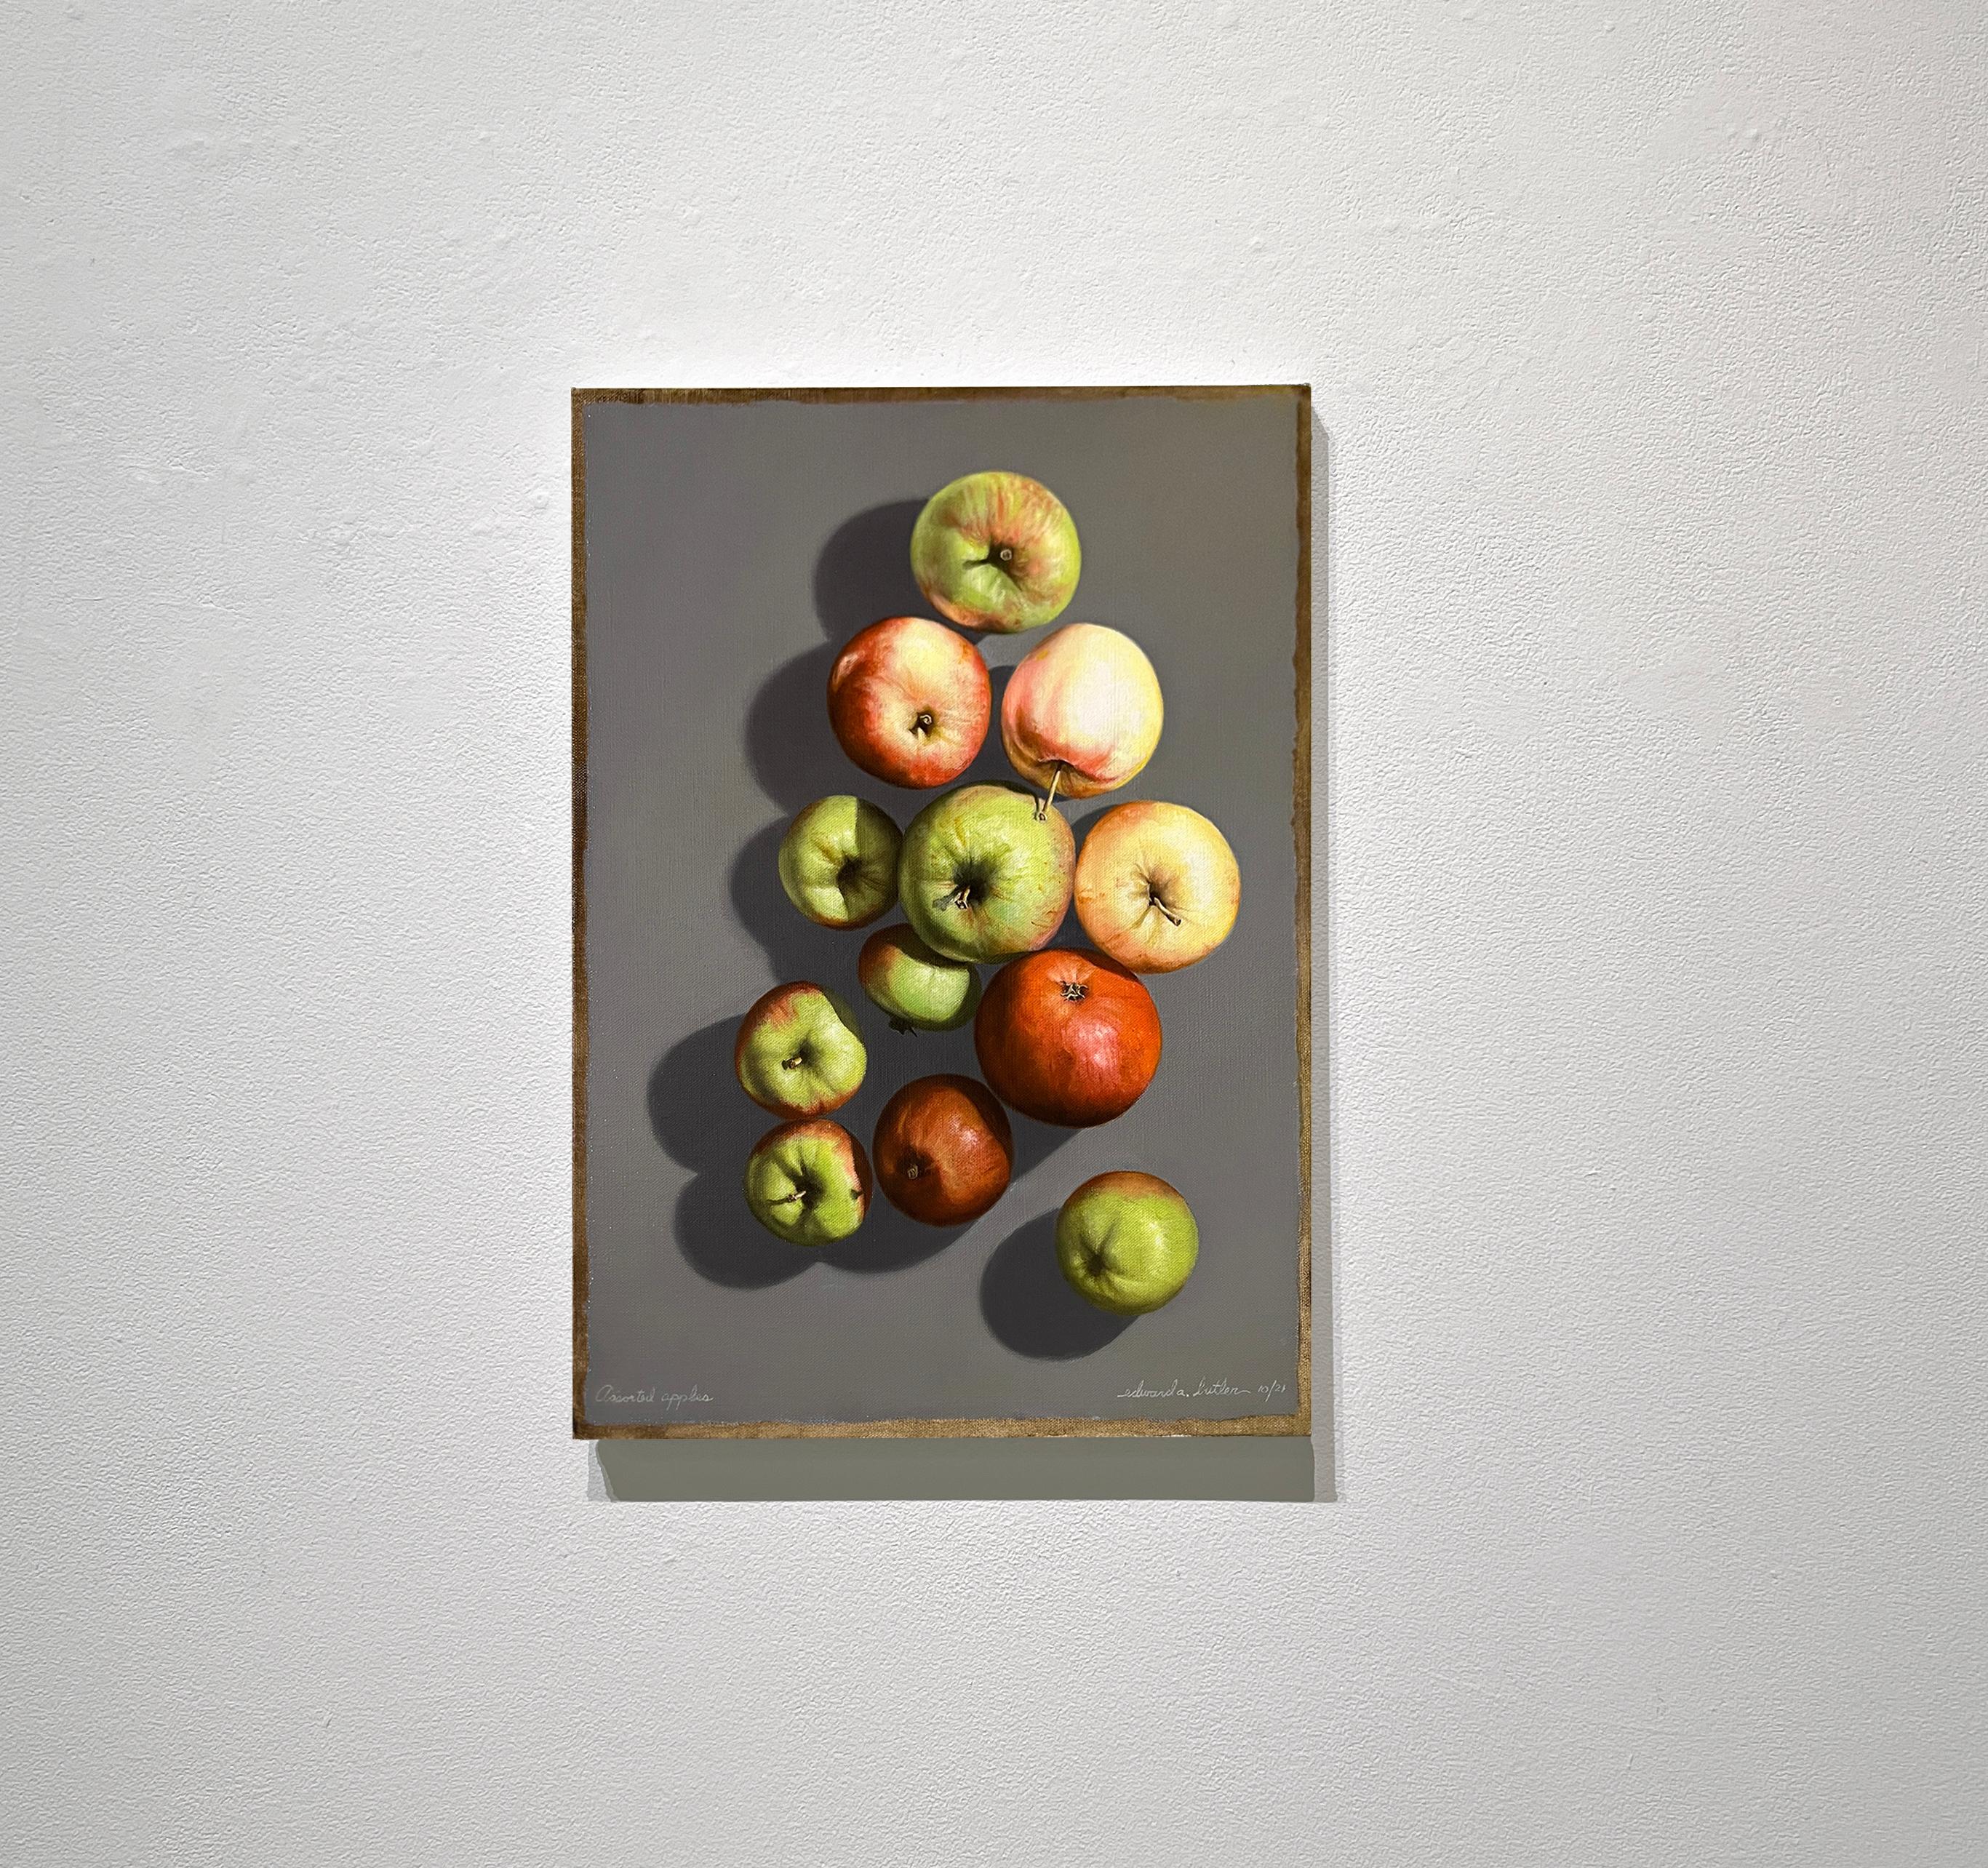 ASSORTED APPLES - Contemporary Still Life / Realism / Photorealism - Painting by Edward A. Butler